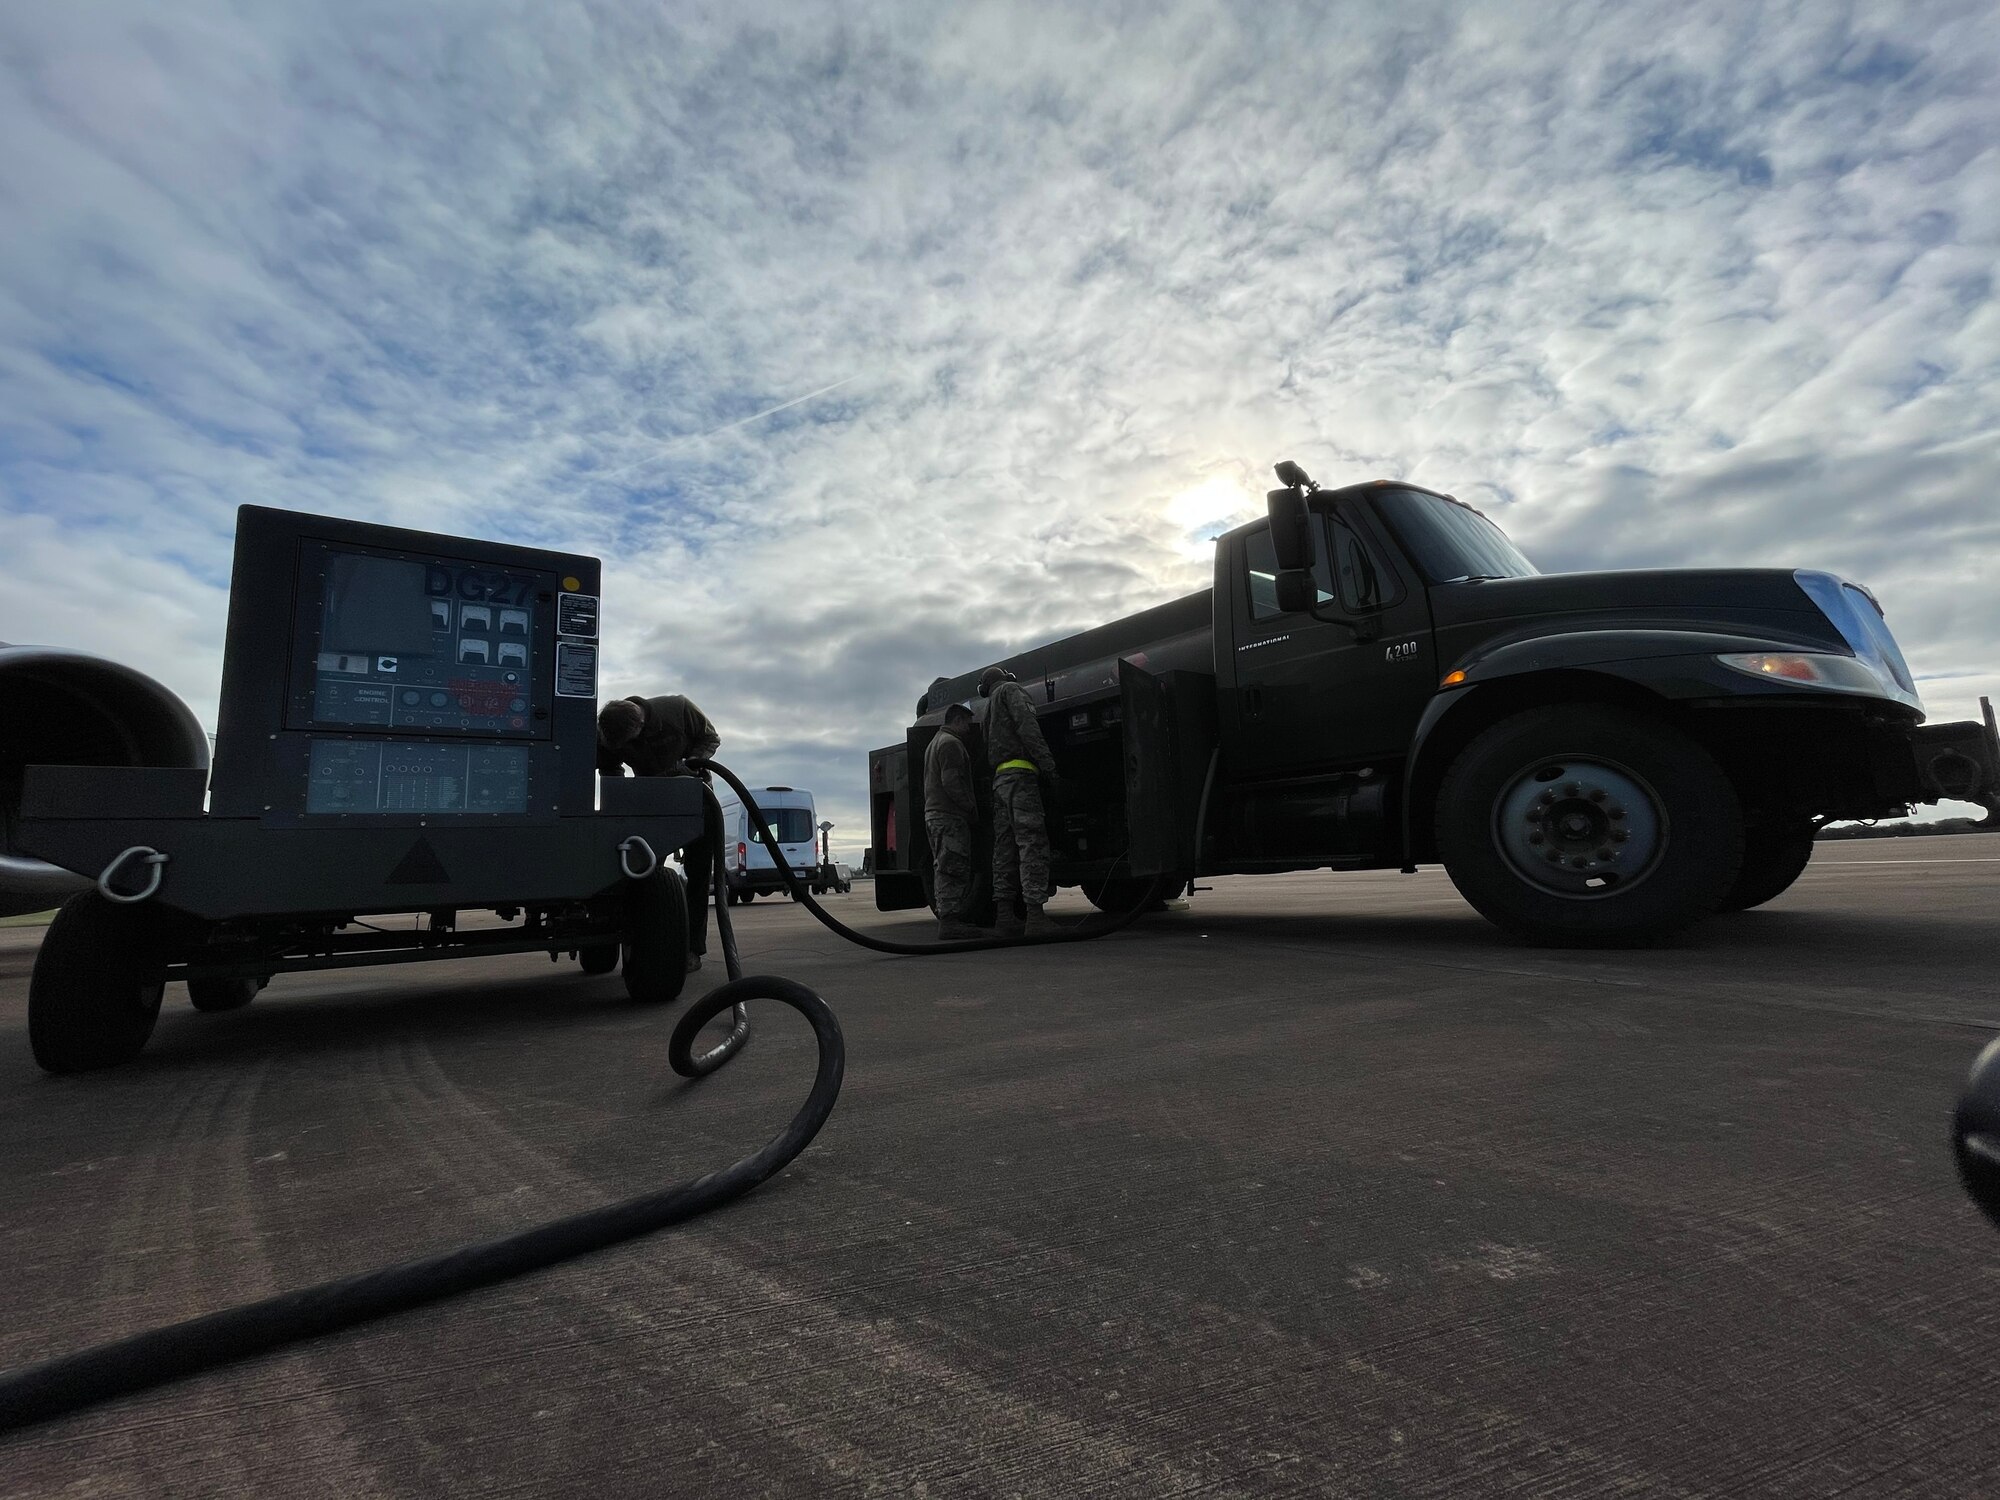 U.S. Airmen assigned to the 100th Air Refueling Wing fill an aerospace ground equipment power cart with diesel fuel during exercise Castle Forge at Royal Air Force Fairford, England, Nov. 3, 2021. The U.S. Air Force’s forward-deployed forces are engaged, postured and ready with credible force to assure, deter and defend in an increasingly complex security environment. In addition to F-15 Eagle aircraft operations in the Black Sea Region, Castle Forge encompasses the USAFE-wide Agile Combat Employment capstone event. Castle Forge’s components will better enable forces to quickly disperse and continue to deliver air power from locations with varying levels of capacity and support, ensuring Airmen are always ready to respond to potential threats. (U.S. Air Force photo by Senior Airman Joseph Barron)